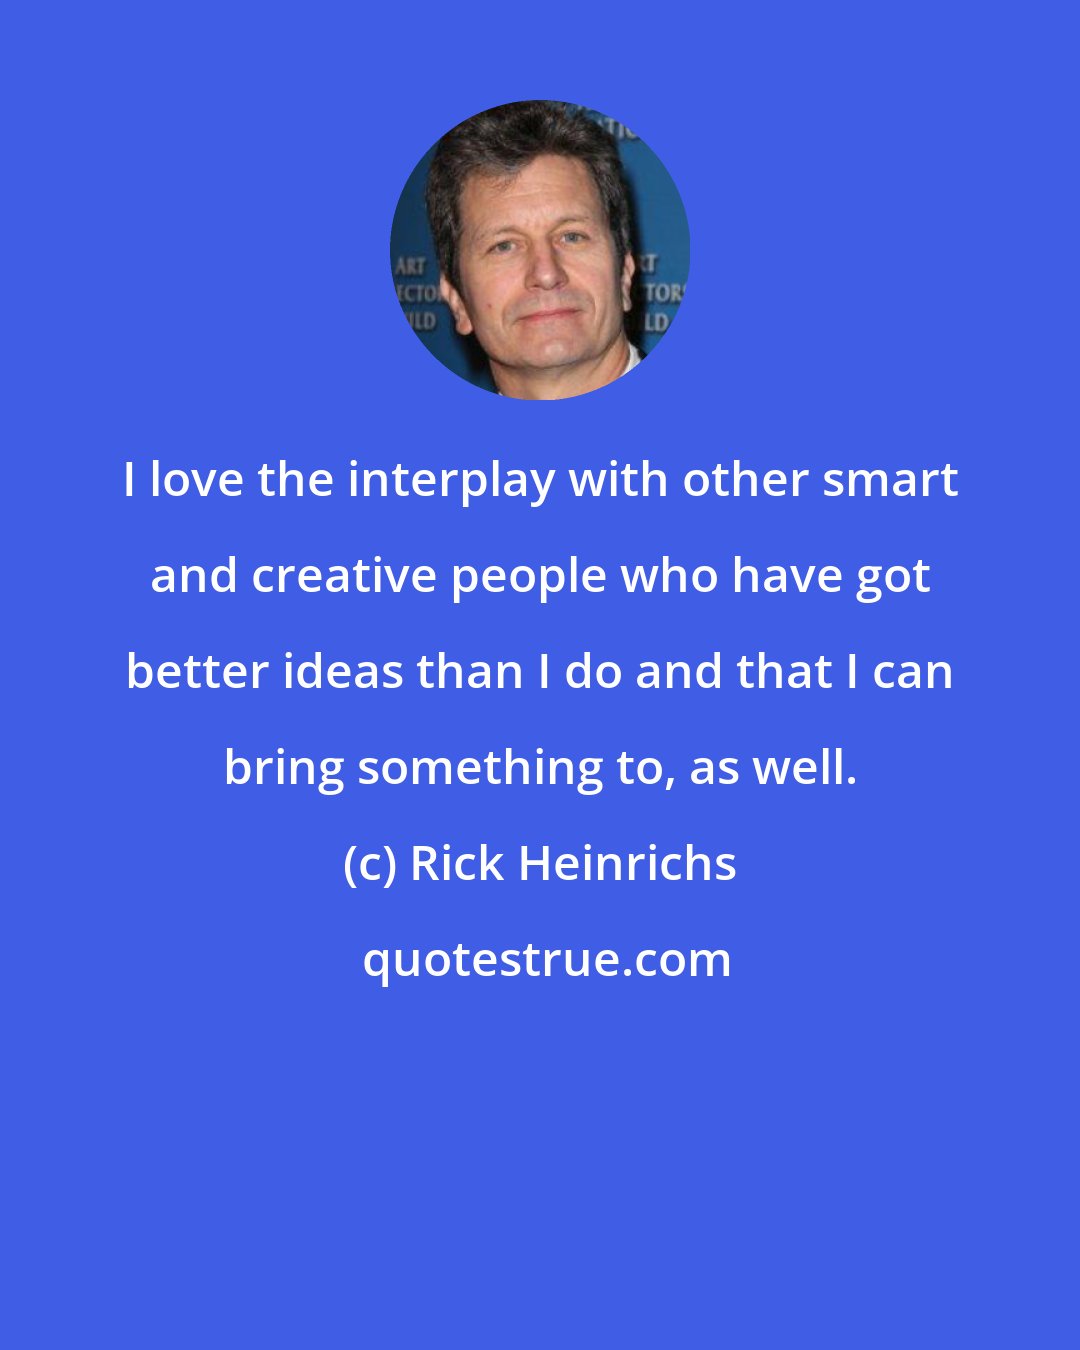 Rick Heinrichs: I love the interplay with other smart and creative people who have got better ideas than I do and that I can bring something to, as well.